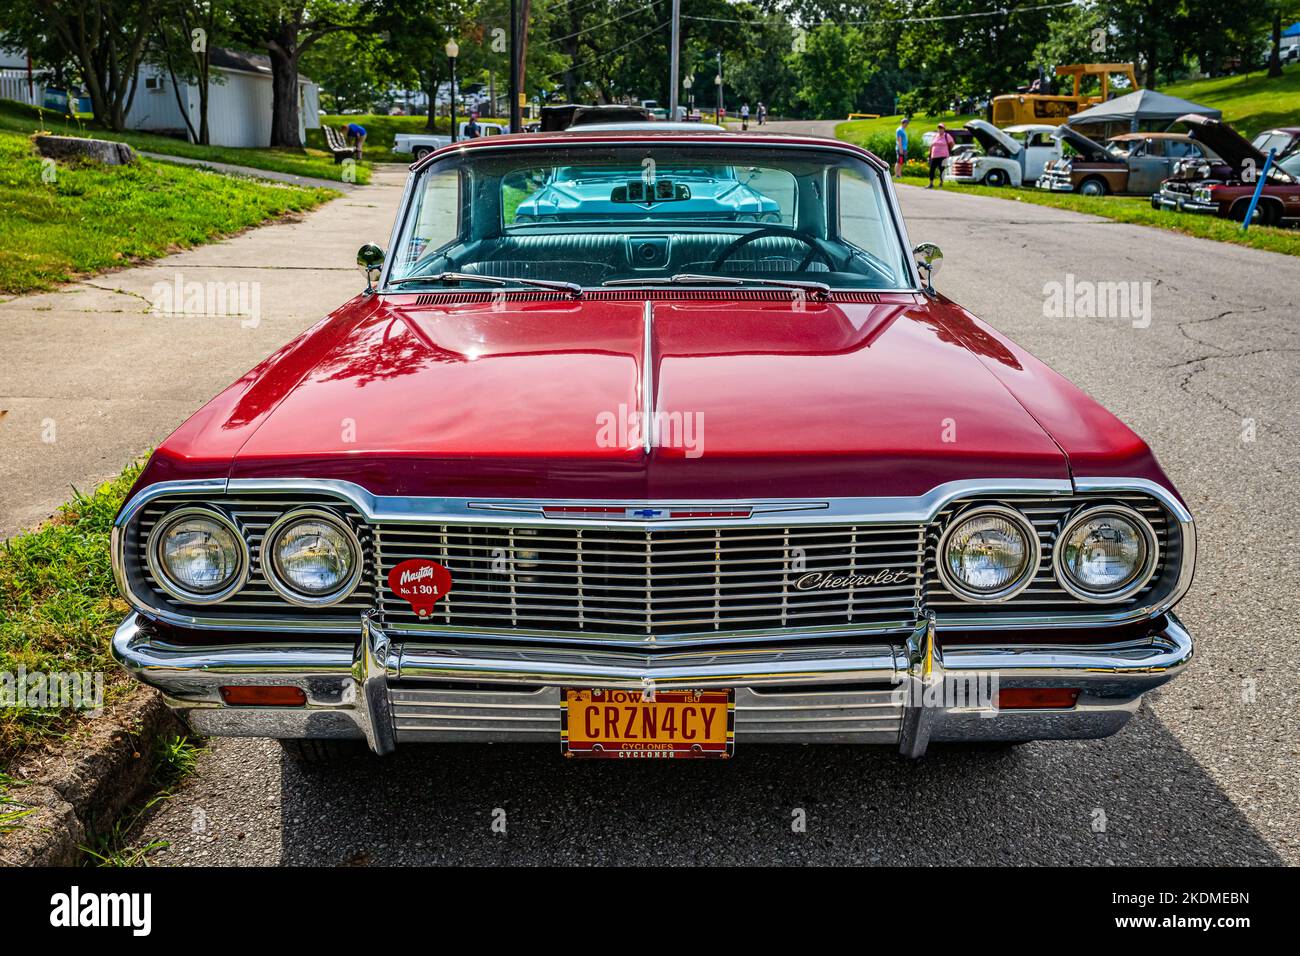 Des Moines, IA - July 02, 2022: High perspective front view of a 1964 Chevrolet Impala SS Hardtop Coupe at a local car show. Stock Photo